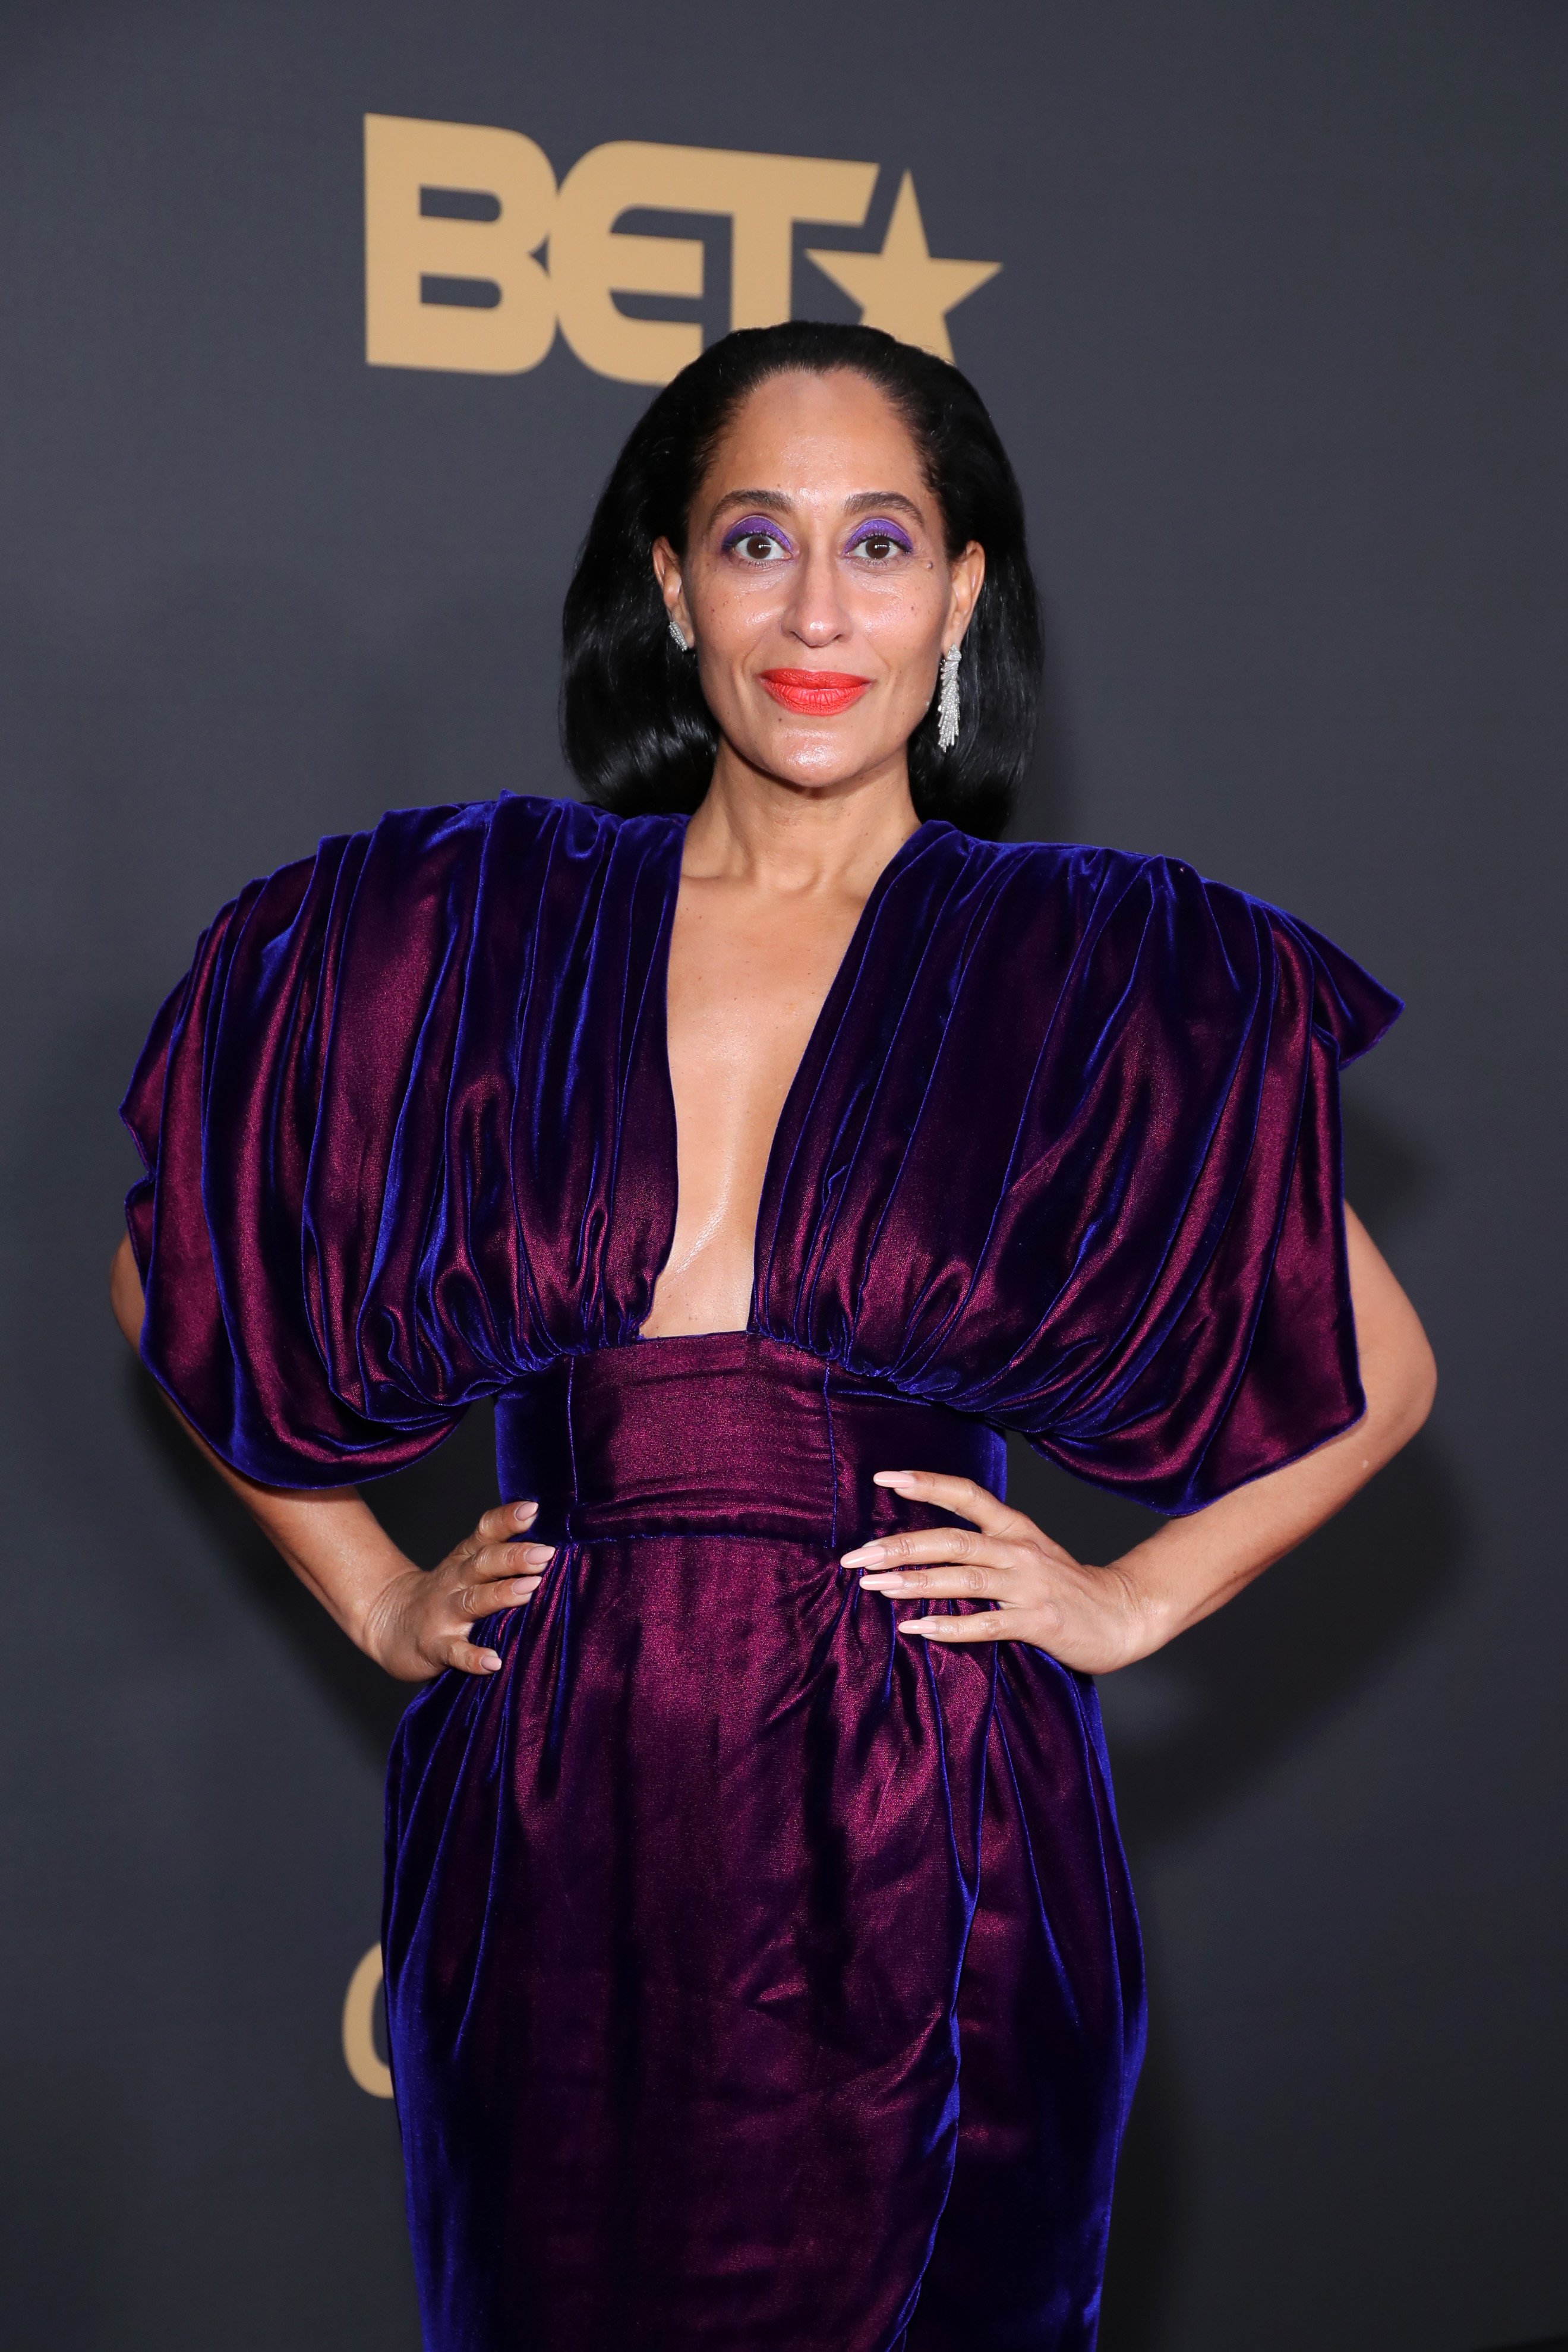 Tracee Ellis Ross at the 51st NAACP Image Awards presented by BET on February 22, 2020 in Pasadena, California. | Photo: Getty Images